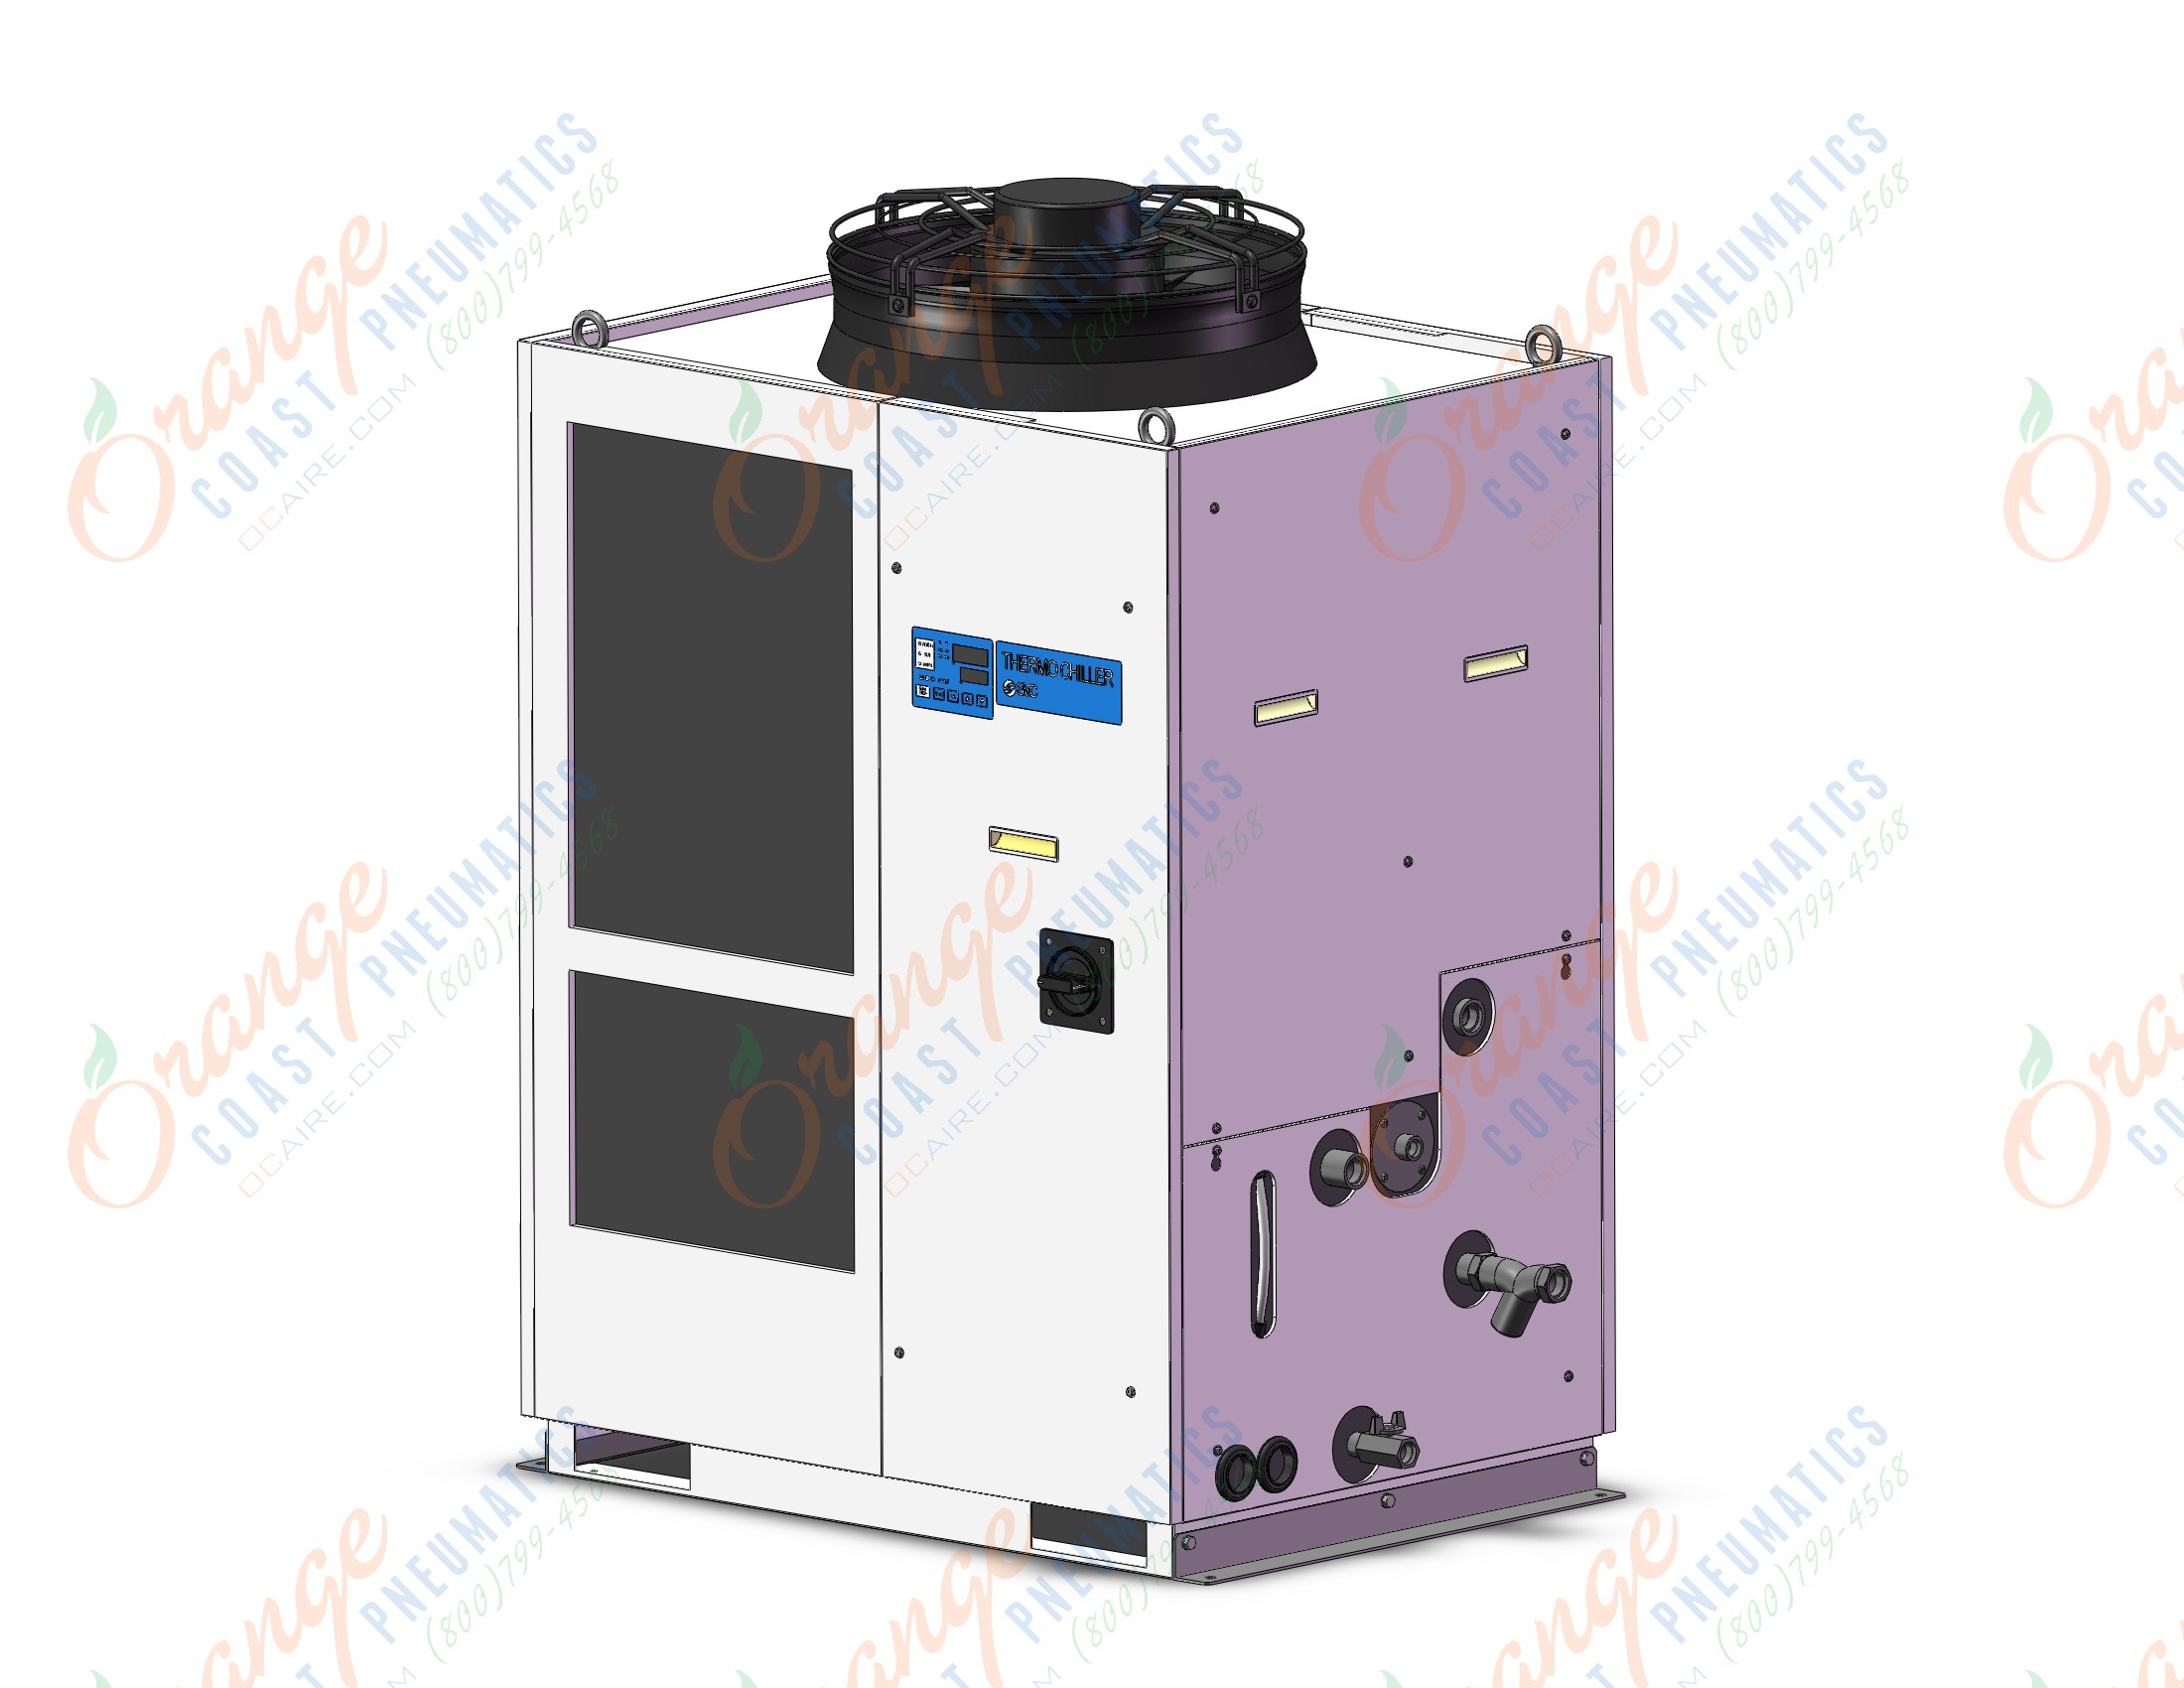 SMC HRSH100-A-40 thermo chiller, HRS THERMO-CHILLERS